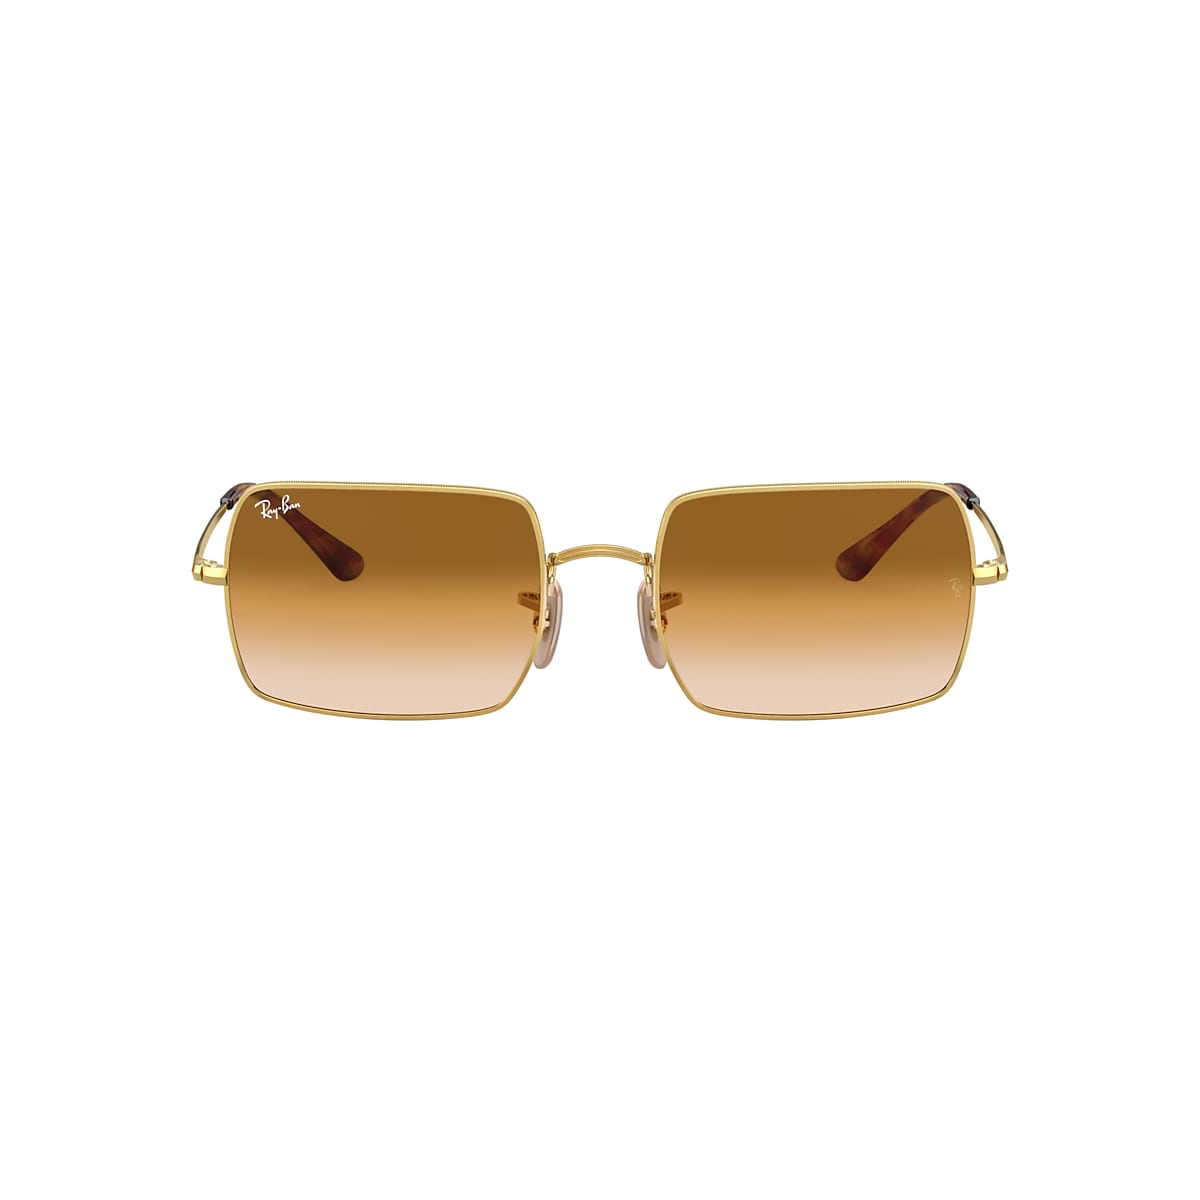 Chanel Brown and Gold Rimless Sunglasses